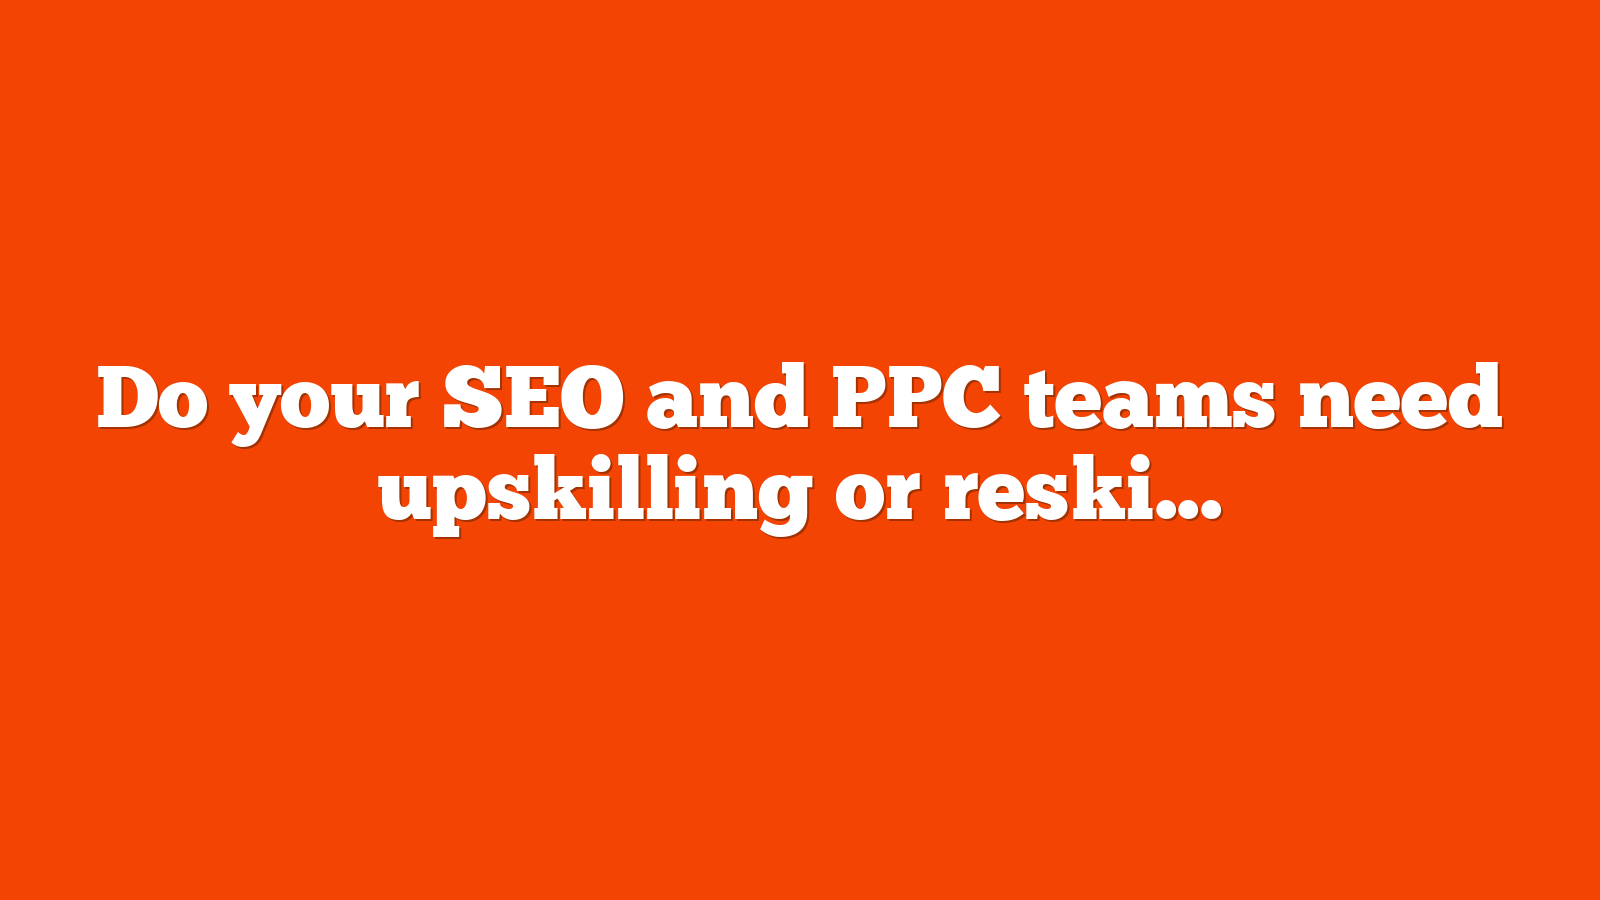 Do your SEO and PPC teams need upskilling or reskilling